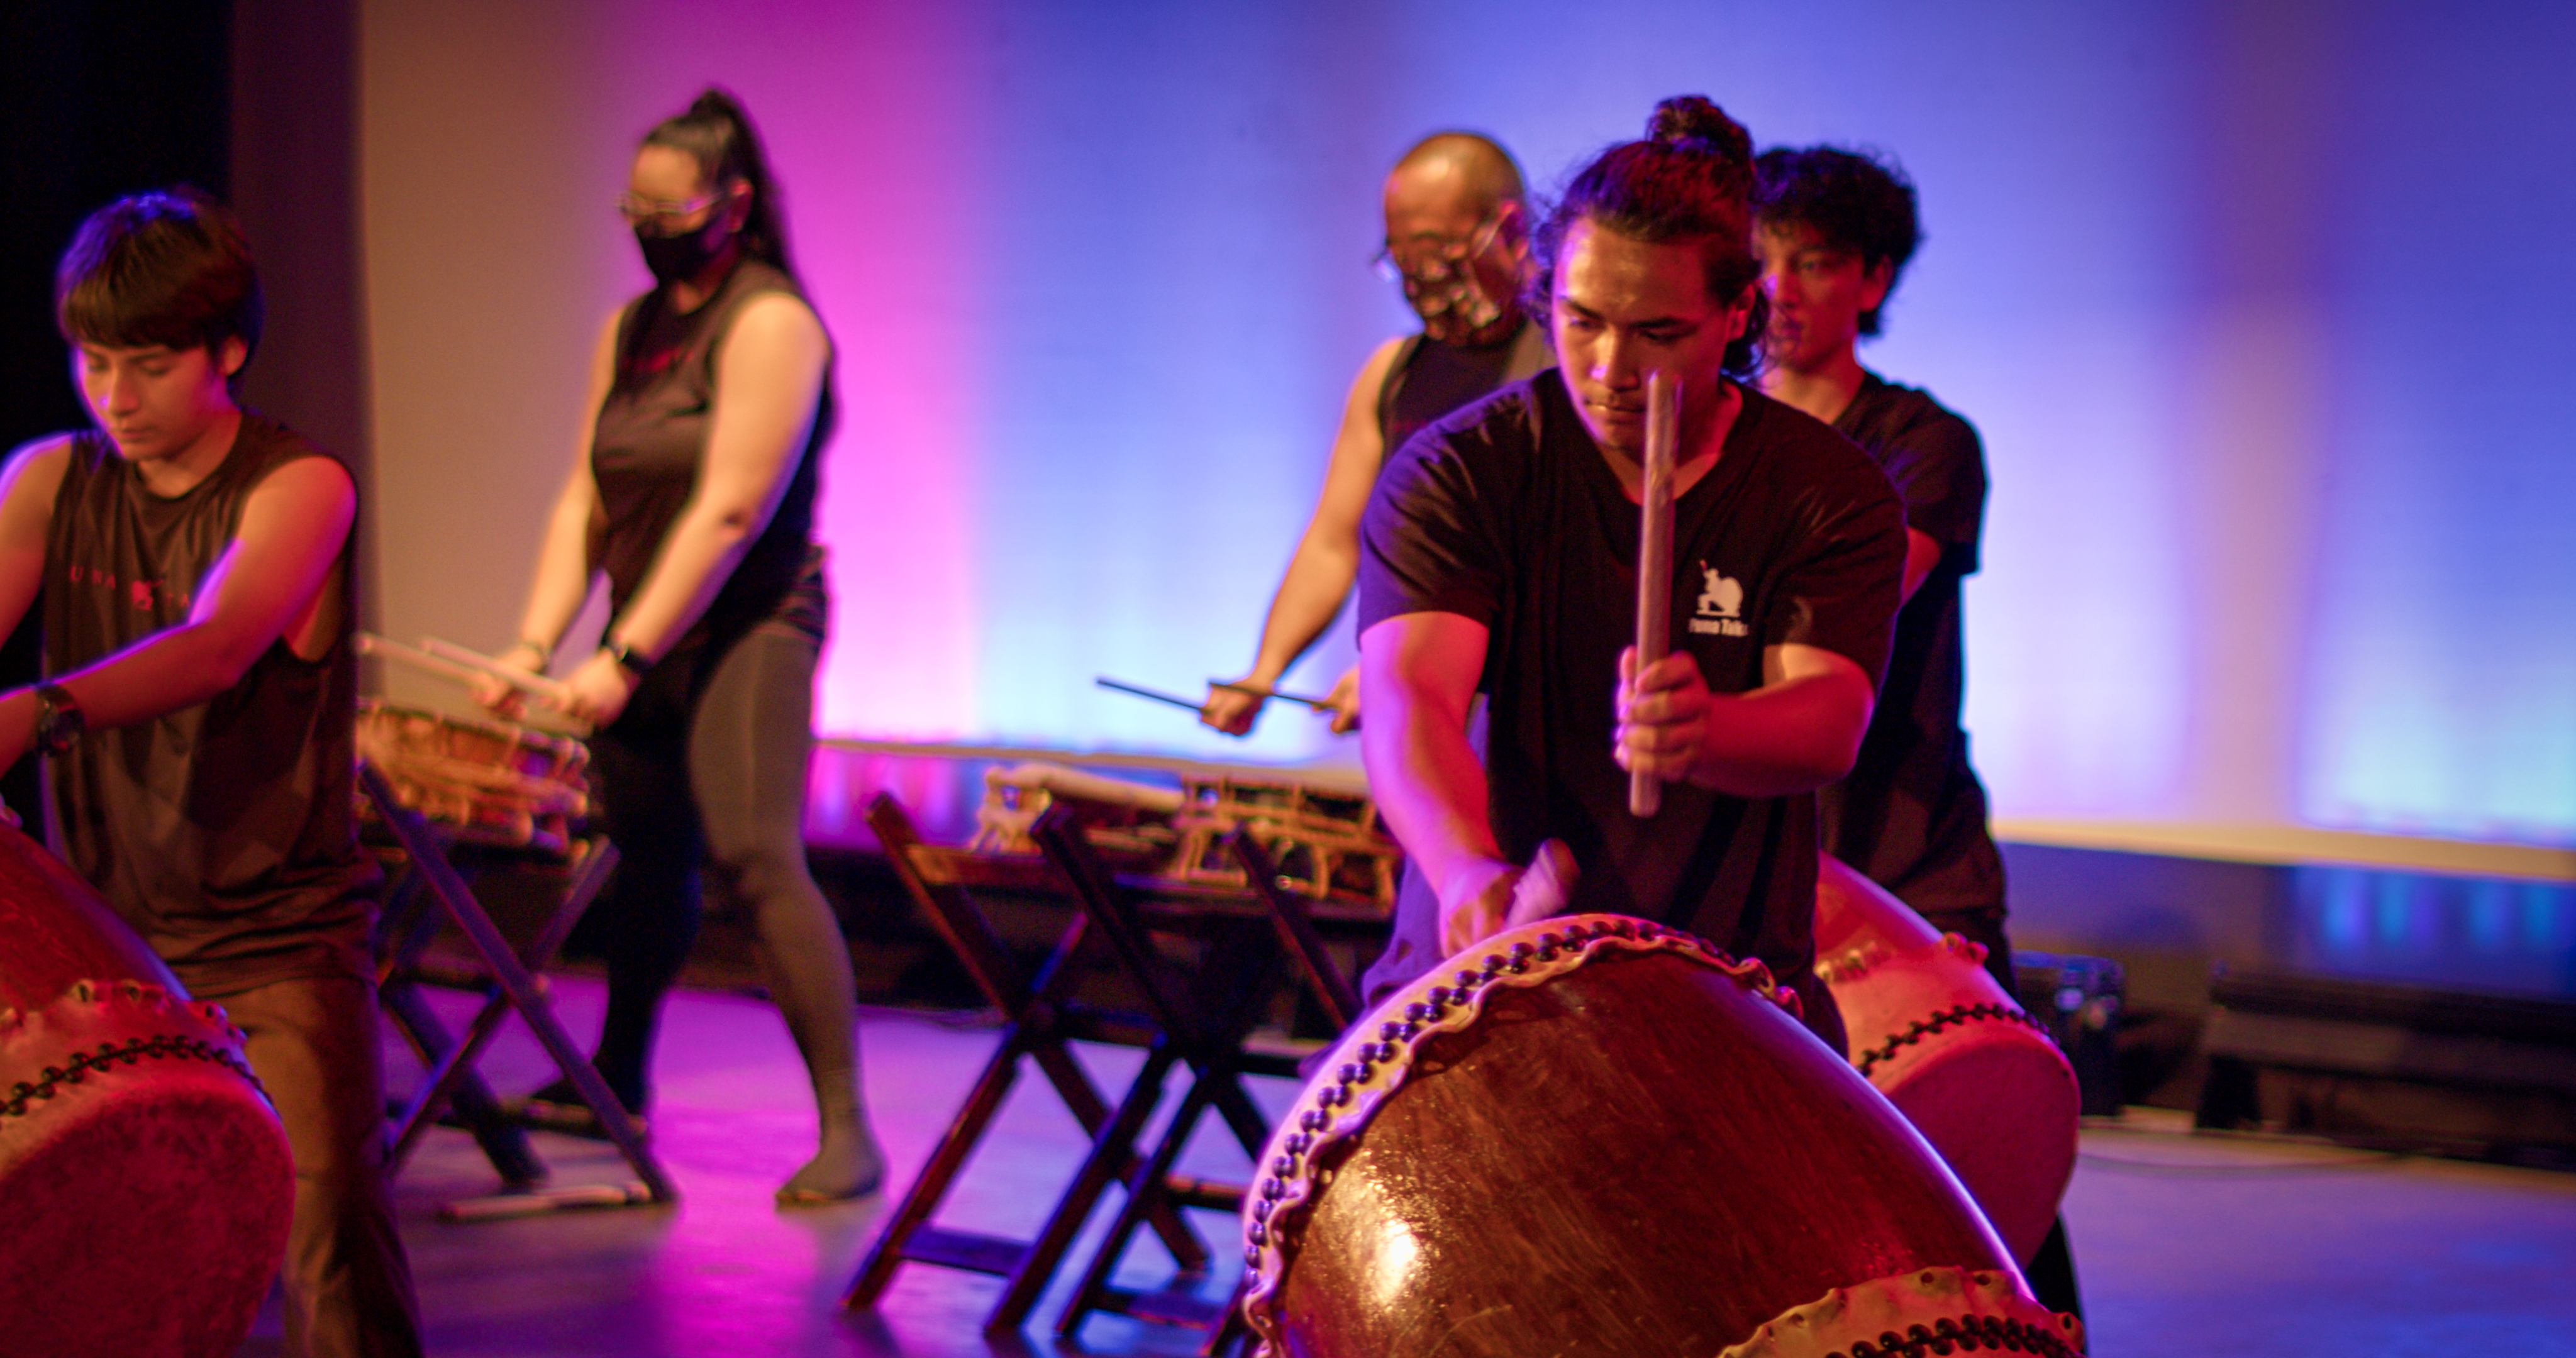 Taiko Drummers at a celebration of Arts and Culture in Hawaii 